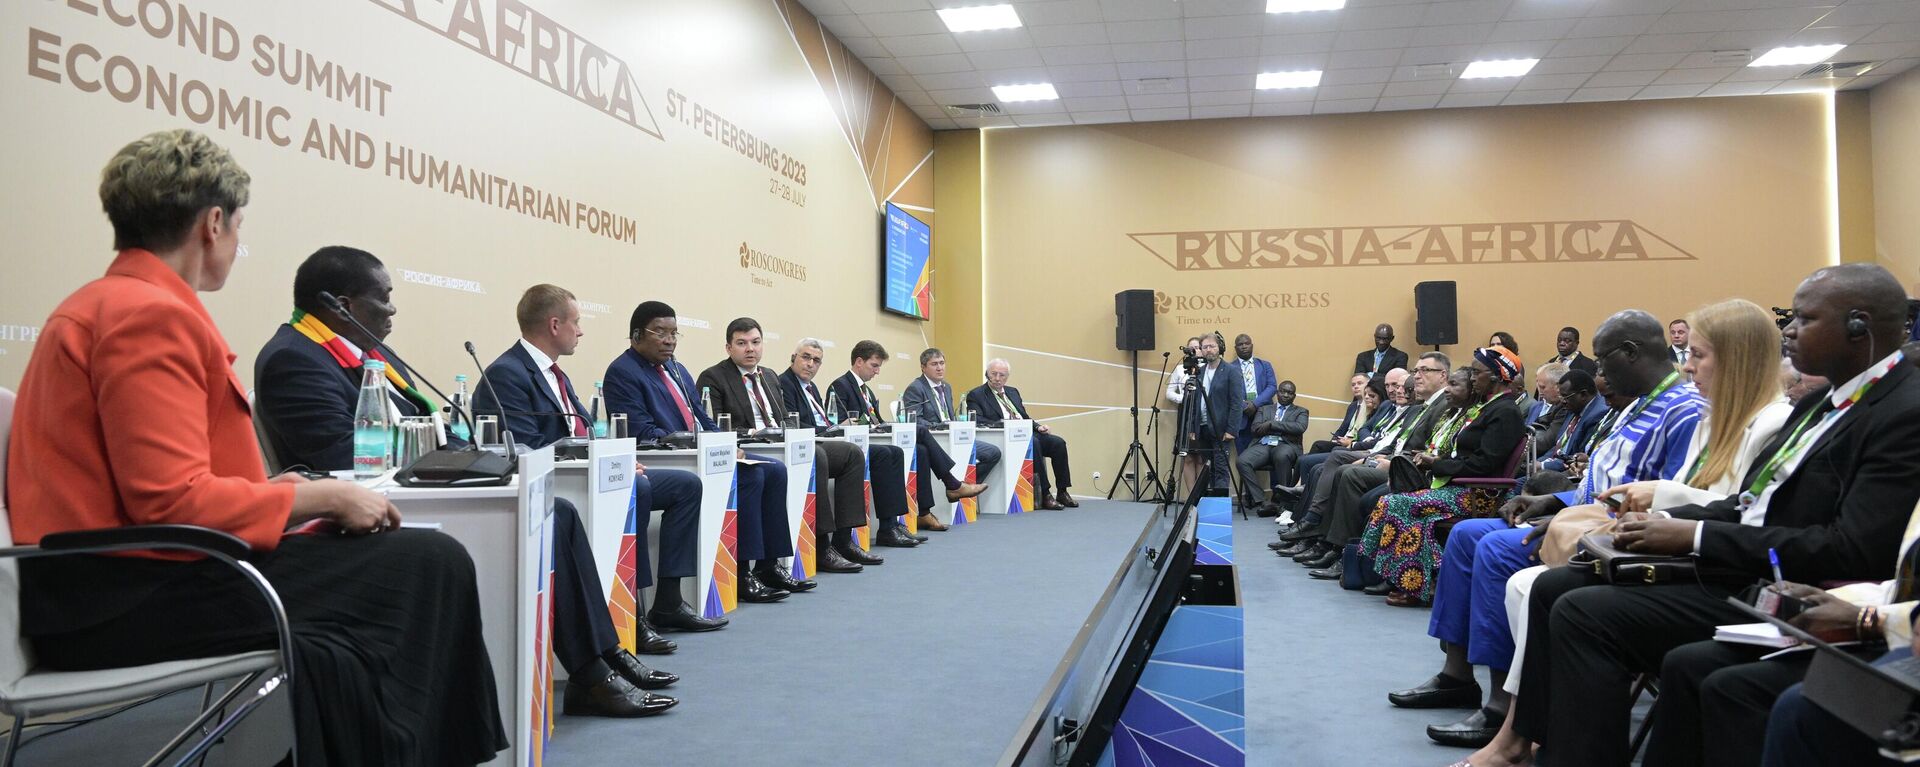 Uralchem, one of the main suppliers of Russian mineral fertilizers to Africa, holds a session titled Stabilizing the Fertiliser Market to Eradicate Hunger in African Countries as part of the second Russia-Africa Summit and Economic and Humanitarian Forum in St. Petersburg, Russia, on July 27, 2023. - Sputnik Africa, 1920, 31.07.2023